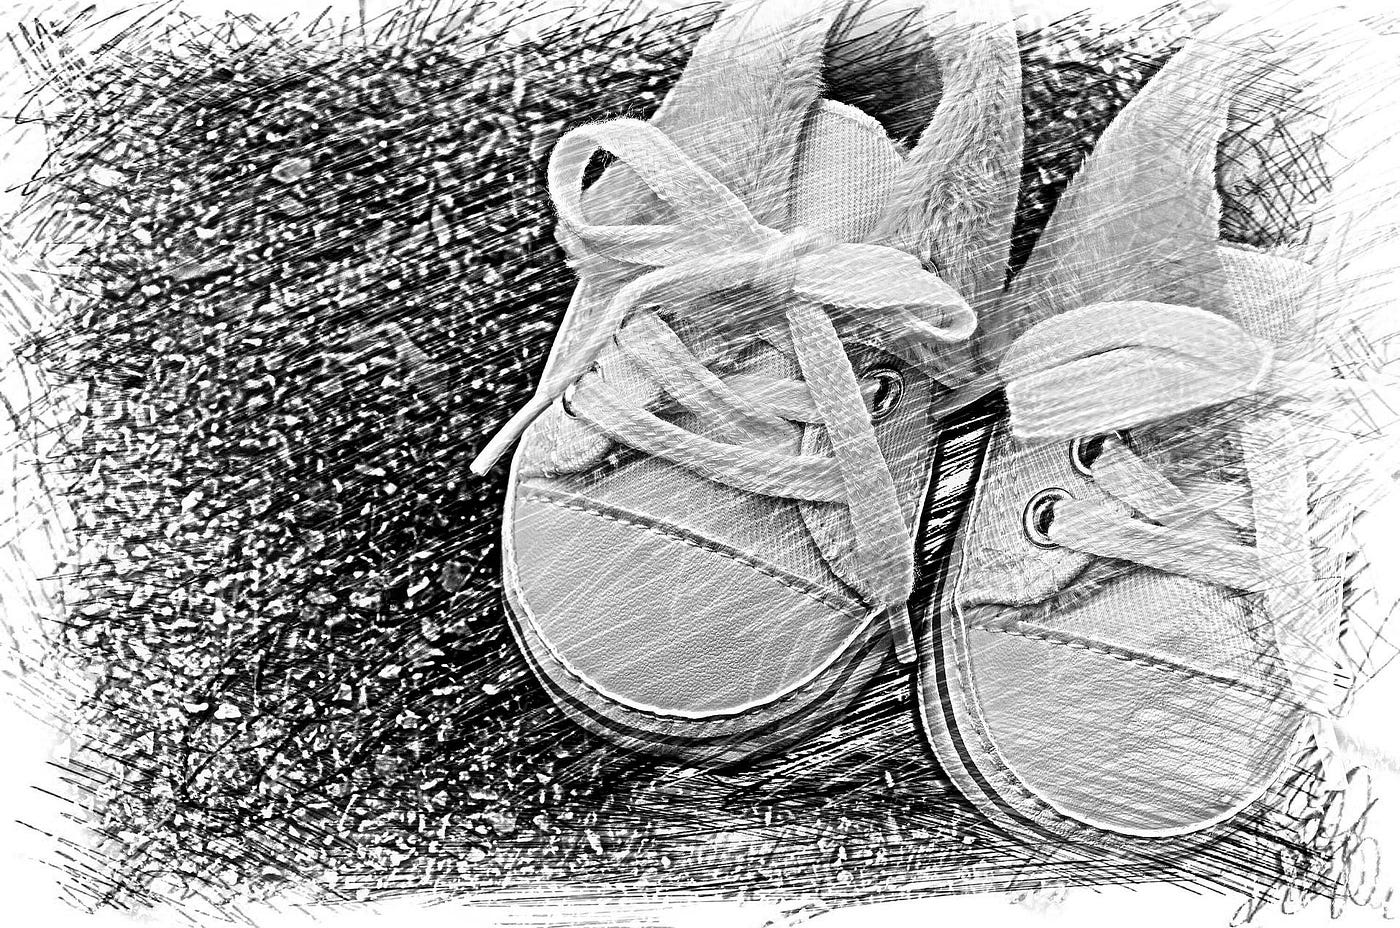 A Simple Analysis of Ernest Hemingway's Shortest Story About Baby Shoes |  by Jose Luis Ontanon Nunez | The Writing Cooperative